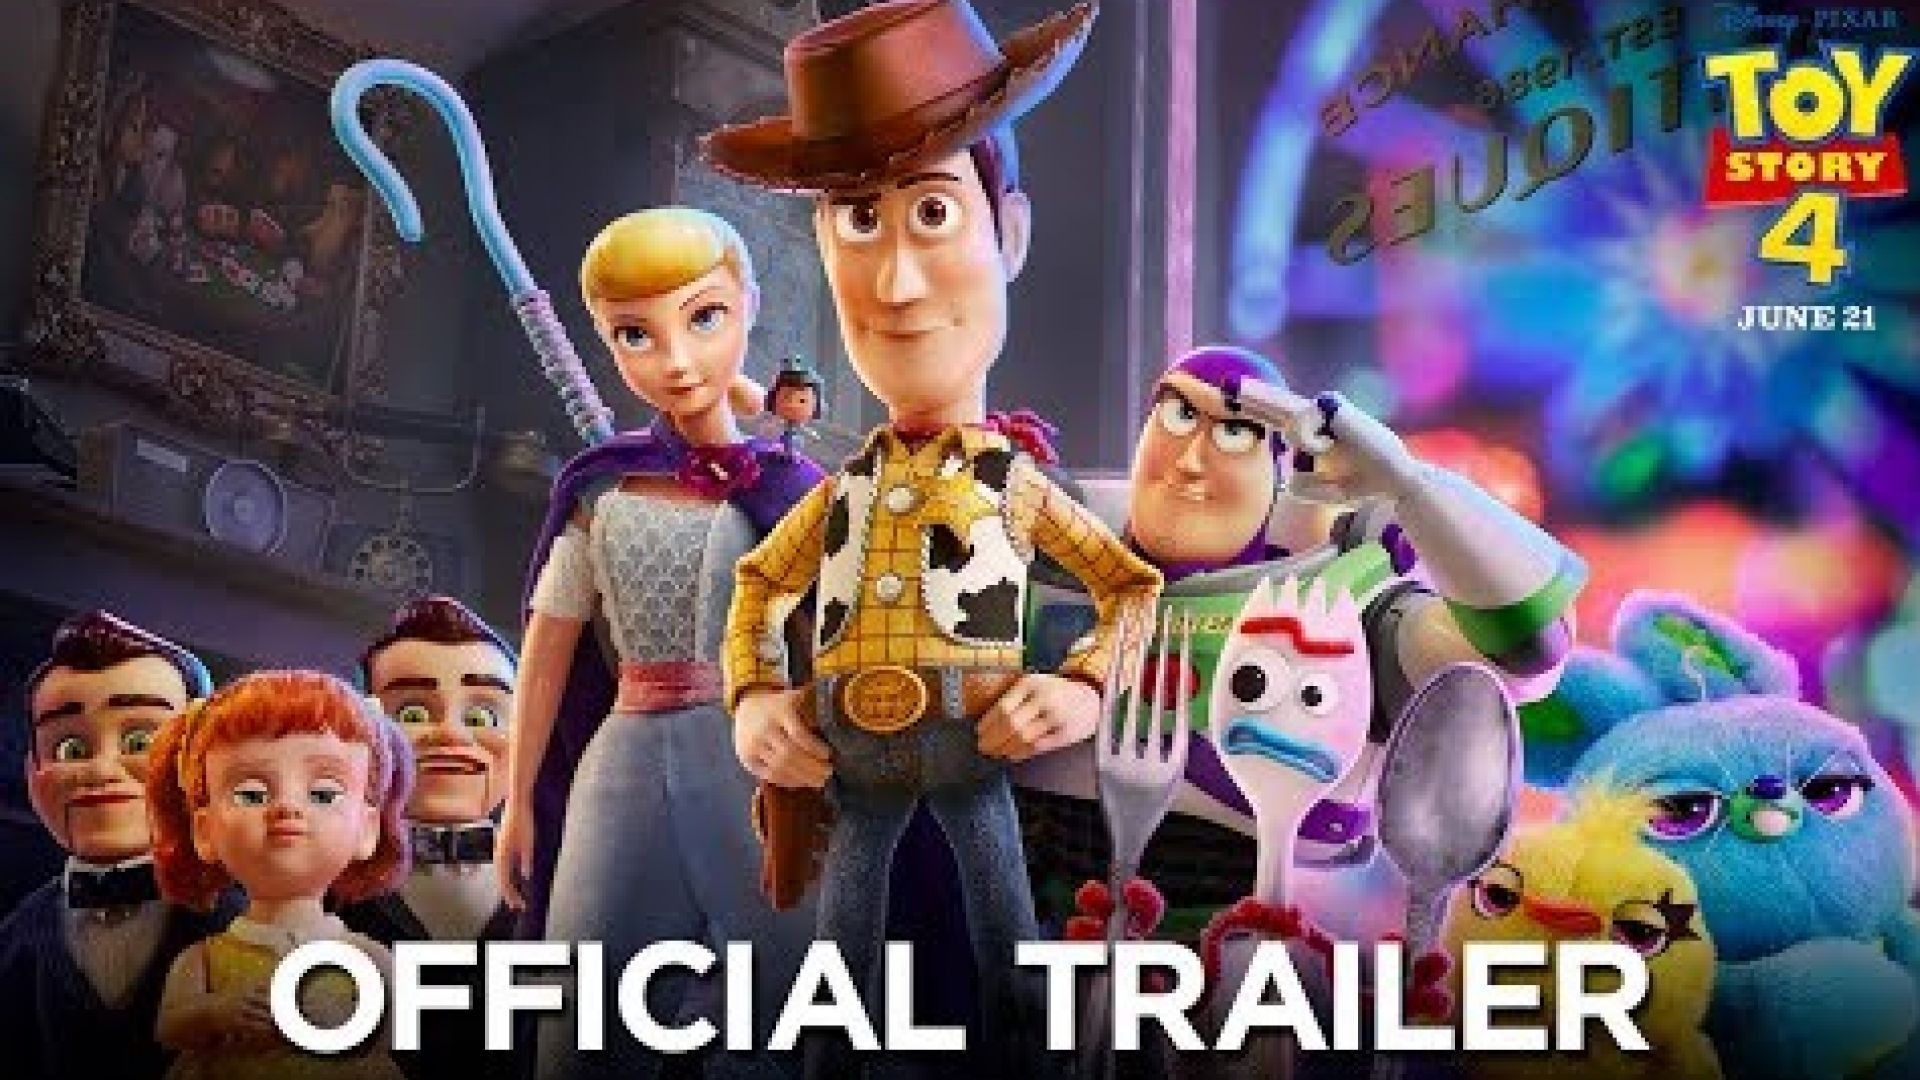 ‘Toy Story 4’ Trailer